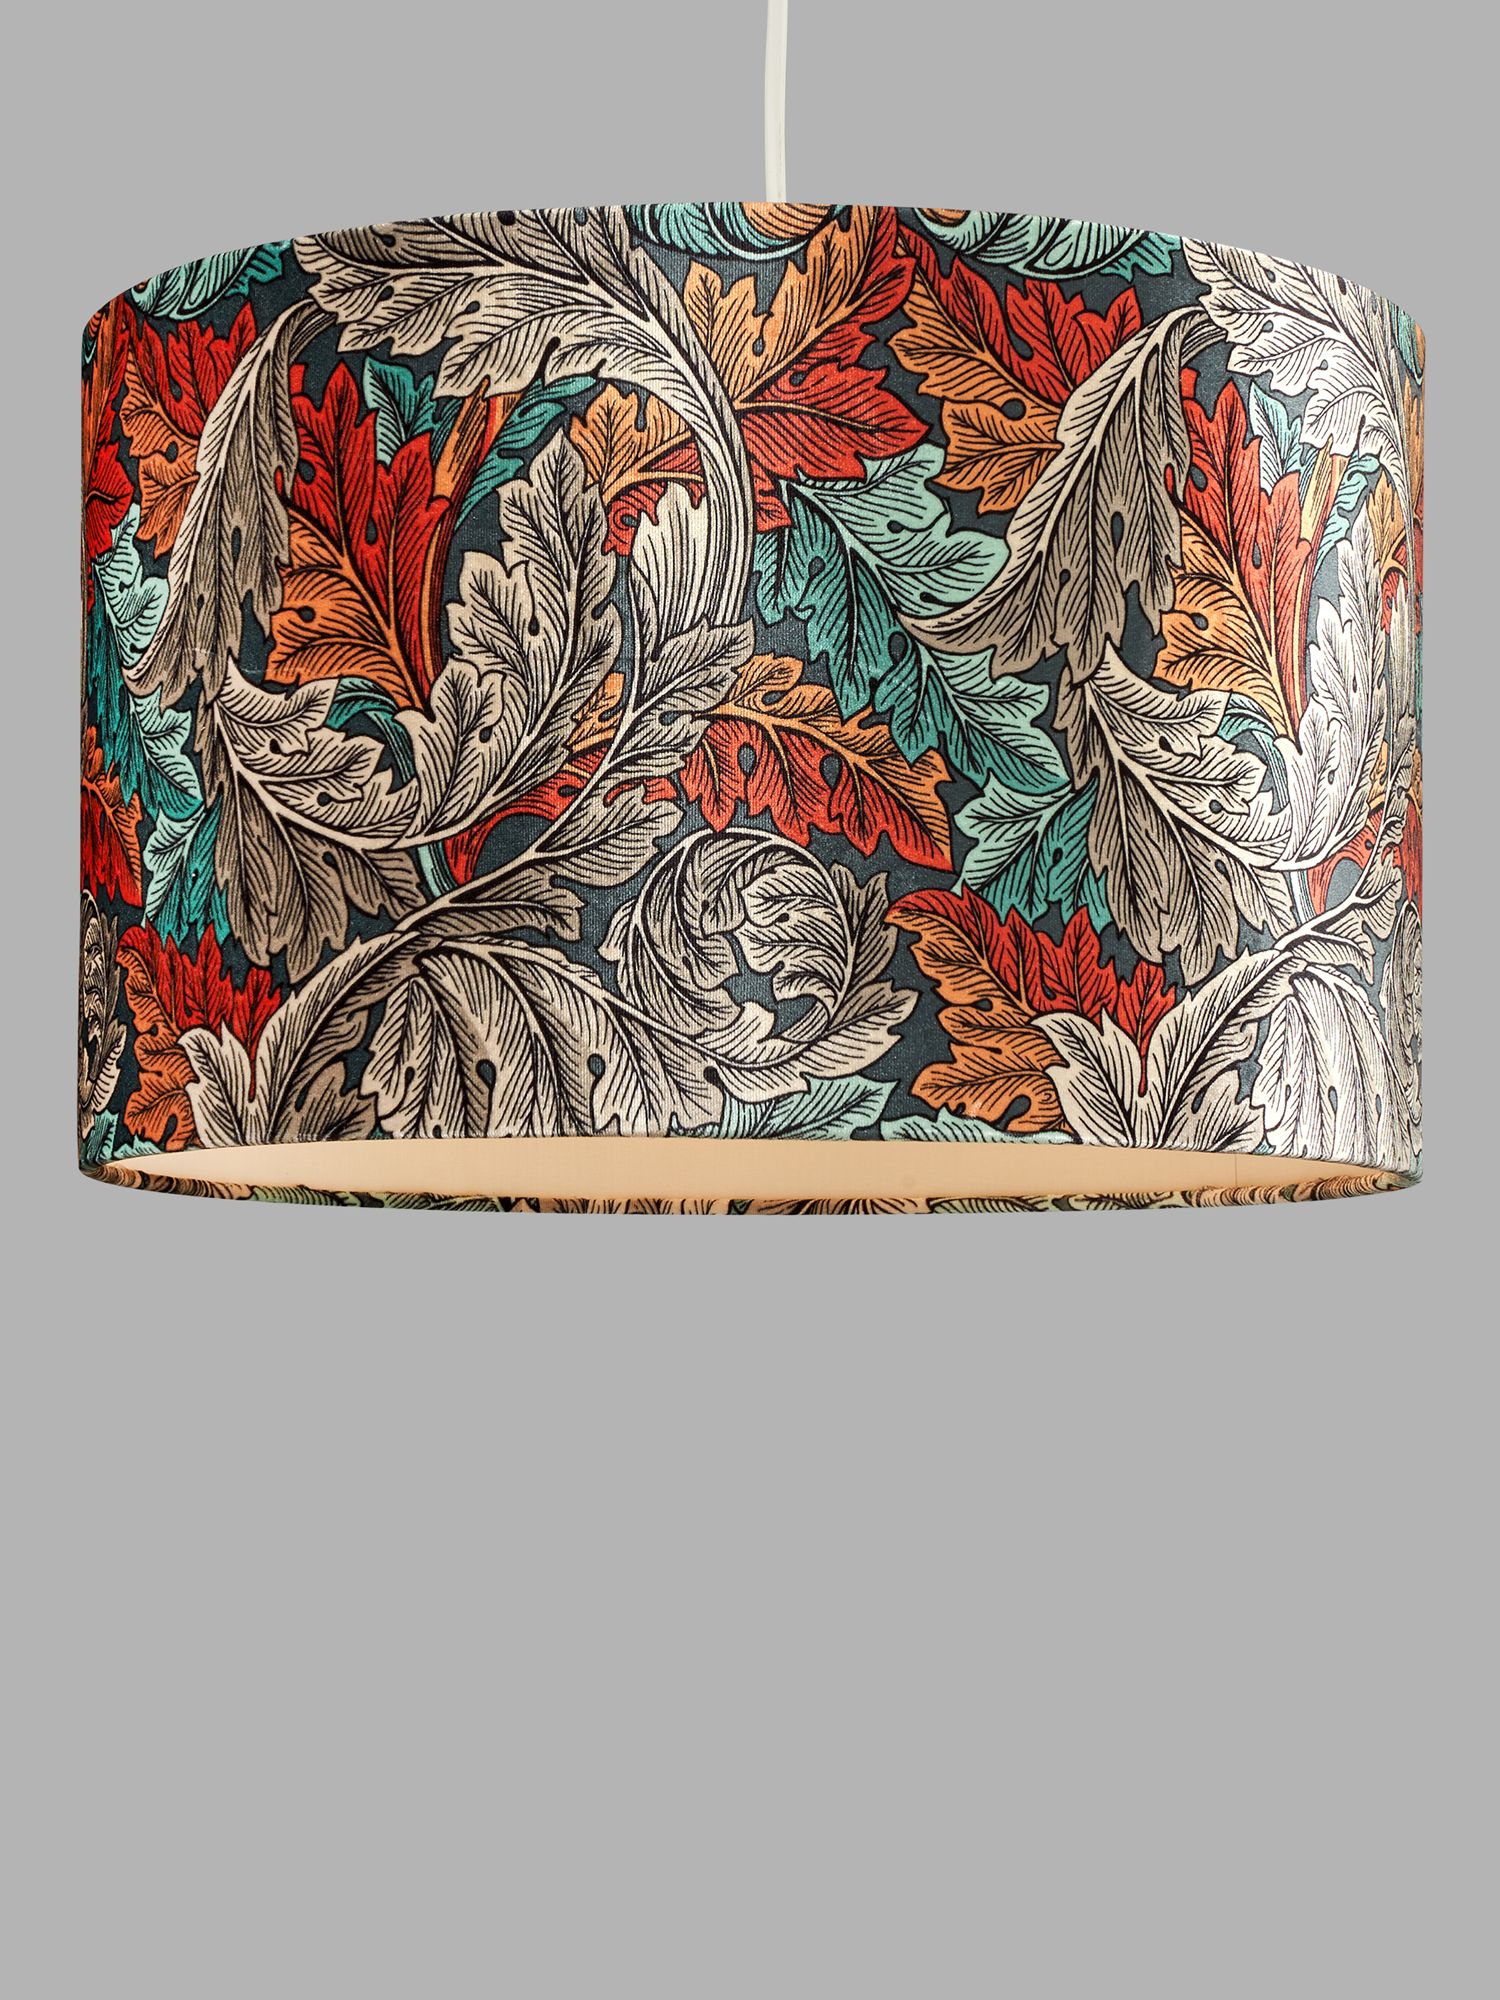 Photo of Morris & co. acanthus lampshade forest